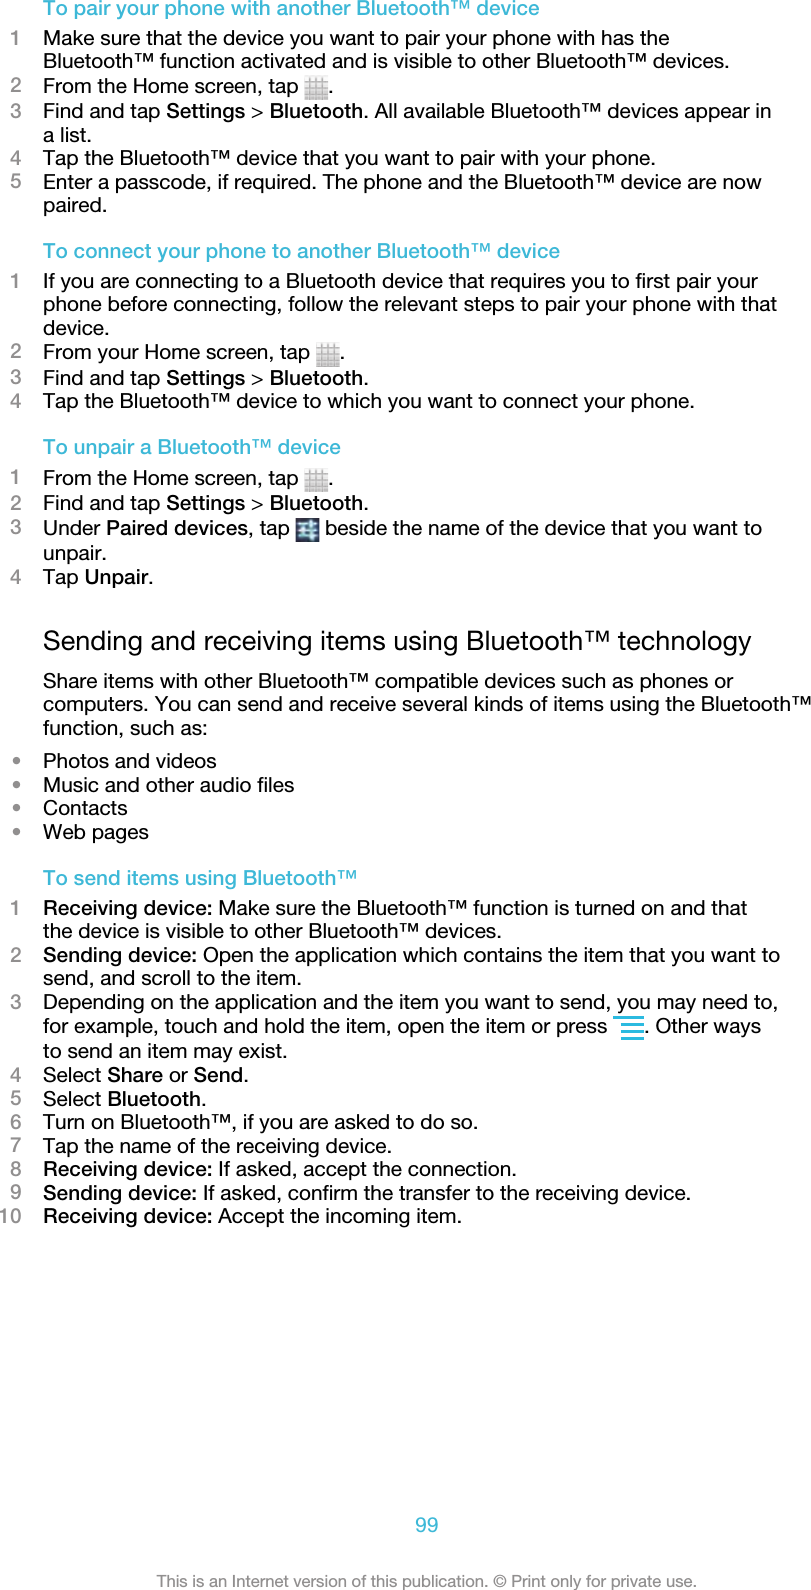 To pair your phone with another Bluetooth™ device1Make sure that the device you want to pair your phone with has theBluetooth™ function activated and is visible to other Bluetooth™ devices.2From the Home screen, tap  .3Find and tap Settings &gt; Bluetooth. All available Bluetooth™ devices appear ina list.4Tap the Bluetooth™ device that you want to pair with your phone.5Enter a passcode, if required. The phone and the Bluetooth™ device are nowpaired.To connect your phone to another Bluetooth™ device1If you are connecting to a Bluetooth device that requires you to first pair yourphone before connecting, follow the relevant steps to pair your phone with thatdevice.2From your Home screen, tap  .3Find and tap Settings &gt; Bluetooth.4Tap the Bluetooth™ device to which you want to connect your phone.To unpair a Bluetooth™ device1From the Home screen, tap  .2Find and tap Settings &gt; Bluetooth.3Under Paired devices, tap   beside the name of the device that you want tounpair.4Tap Unpair.Sending and receiving items using Bluetooth™ technologyShare items with other Bluetooth™ compatible devices such as phones orcomputers. You can send and receive several kinds of items using the Bluetooth™function, such as:•Photos and videos•Music and other audio files•Contacts•Web pagesTo send items using Bluetooth™1Receiving device: Make sure the Bluetooth™ function is turned on and thatthe device is visible to other Bluetooth™ devices.2Sending device: Open the application which contains the item that you want tosend, and scroll to the item.3Depending on the application and the item you want to send, you may need to,for example, touch and hold the item, open the item or press  . Other waysto send an item may exist.4Select Share or Send.5Select Bluetooth.6Turn on Bluetooth™, if you are asked to do so.7Tap the name of the receiving device.8Receiving device: If asked, accept the connection.9Sending device: If asked, confirm the transfer to the receiving device.10 Receiving device: Accept the incoming item.99This is an Internet version of this publication. © Print only for private use.